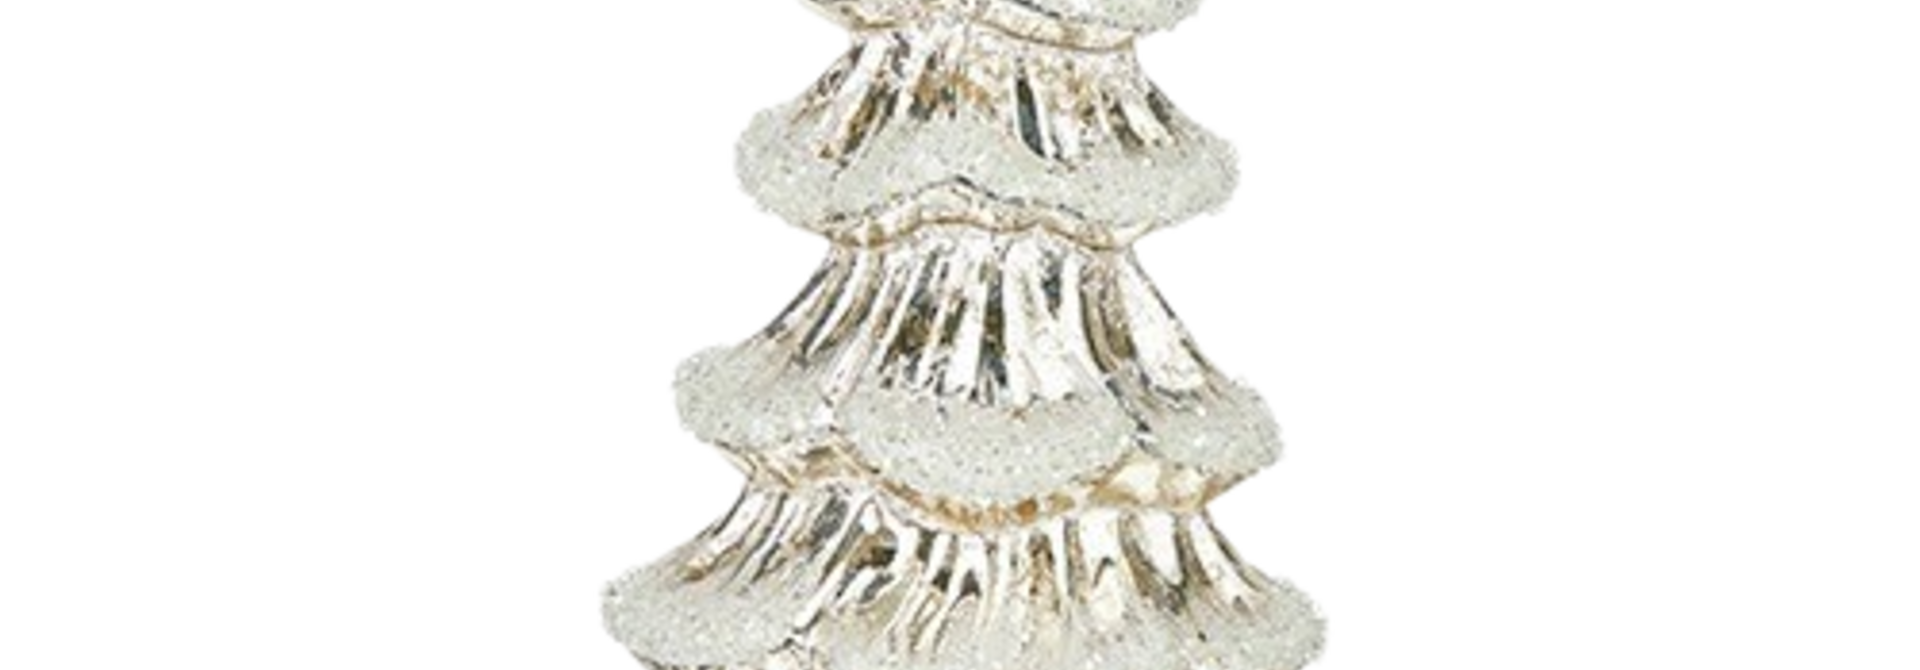 Snowy Elegance | The Holiday Ornament Collection, Silver - 4 Inch x 3.75 Inch x 7.5 Inch